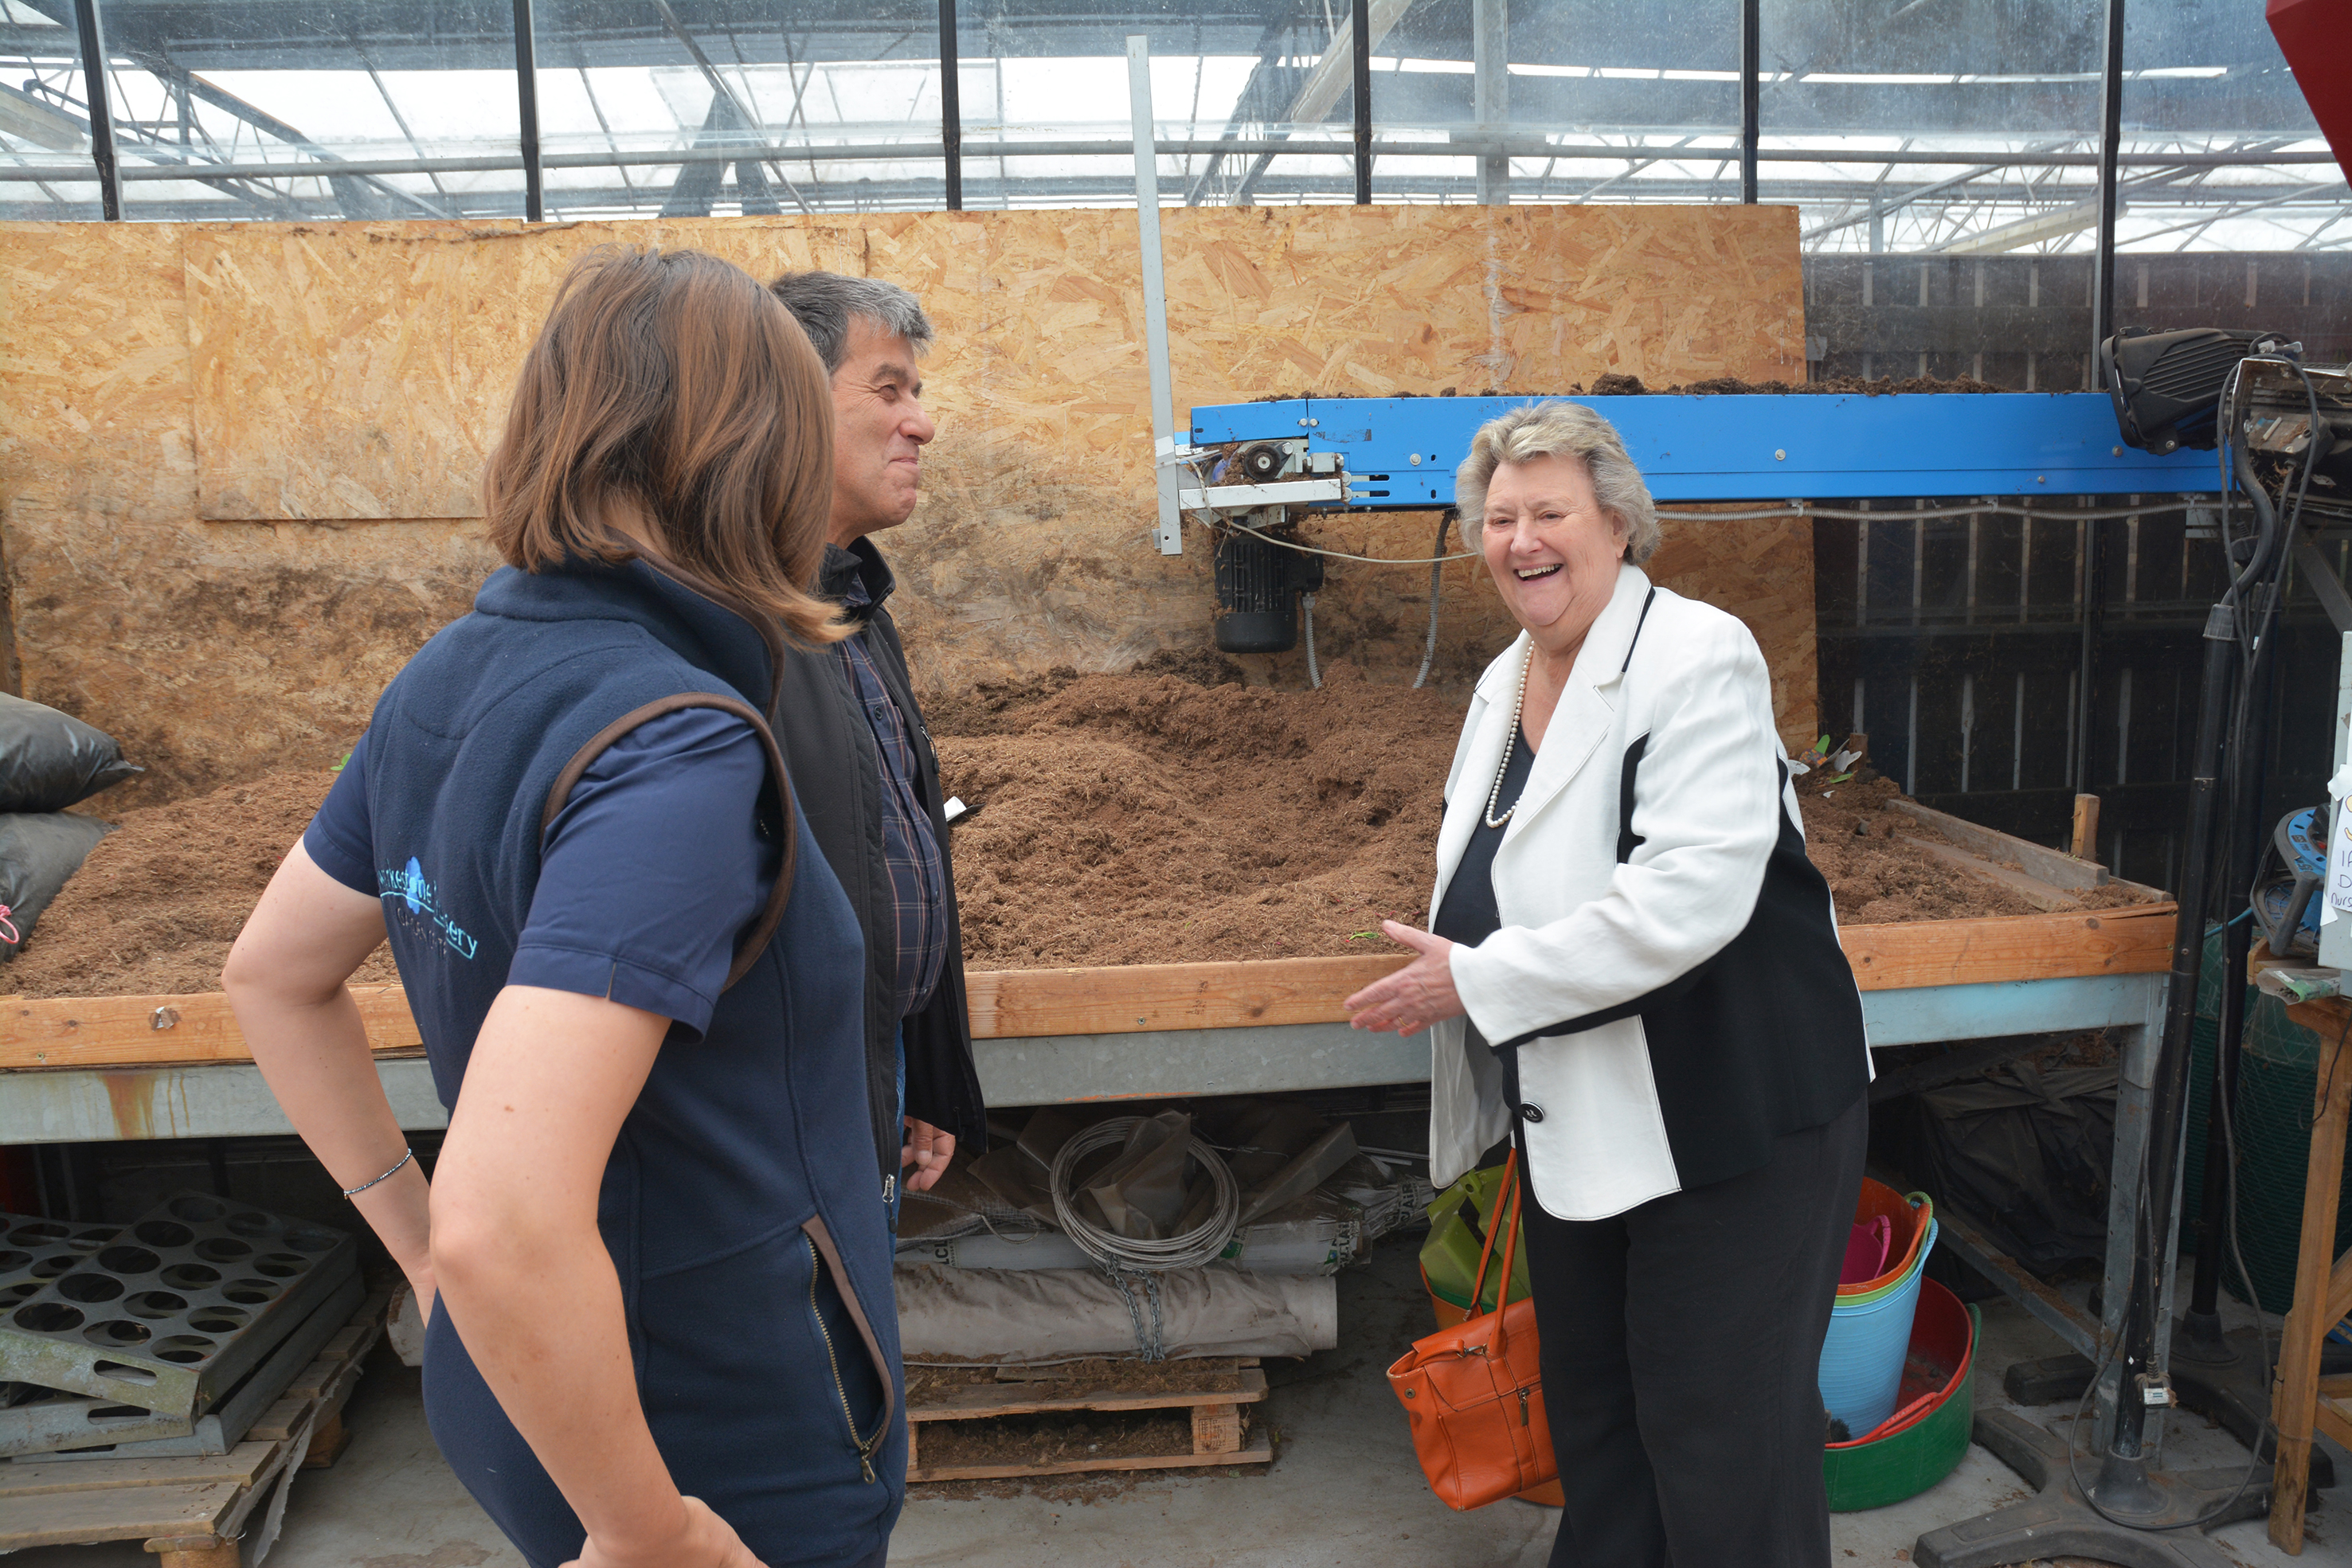 L-R Laura and John Jackson from Swarkestone Nursery and Garden Centre with Heather Wheeler MP discussing growing media which can be seen in the background